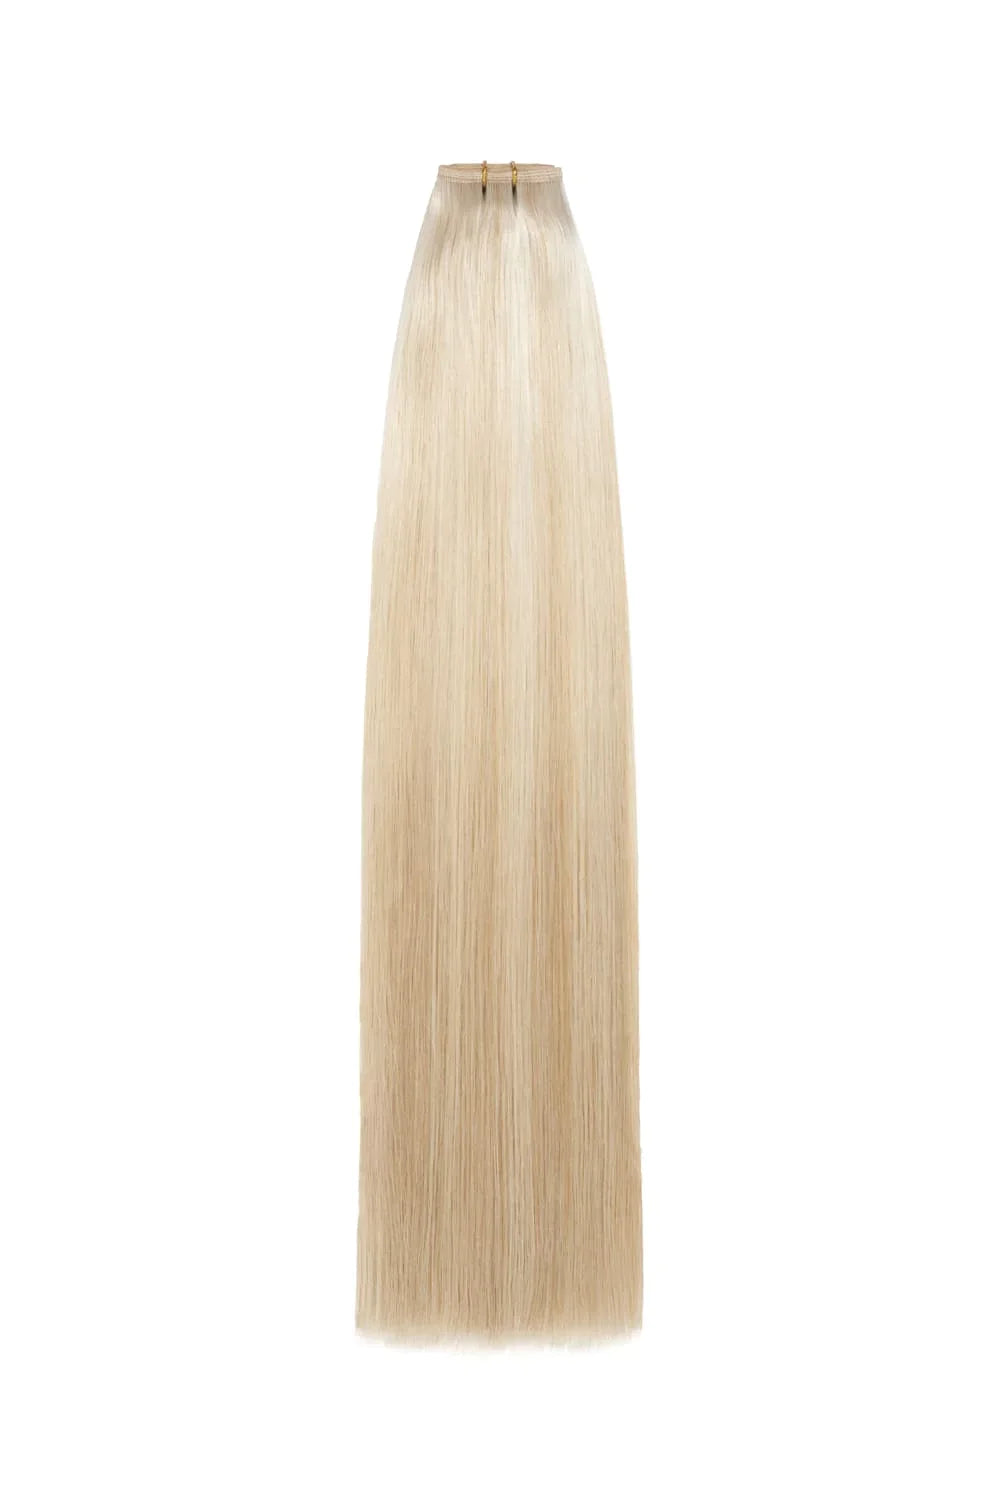 Barbie Blonde (#16/60) Remy Royale Flat Weft Hair Extensions